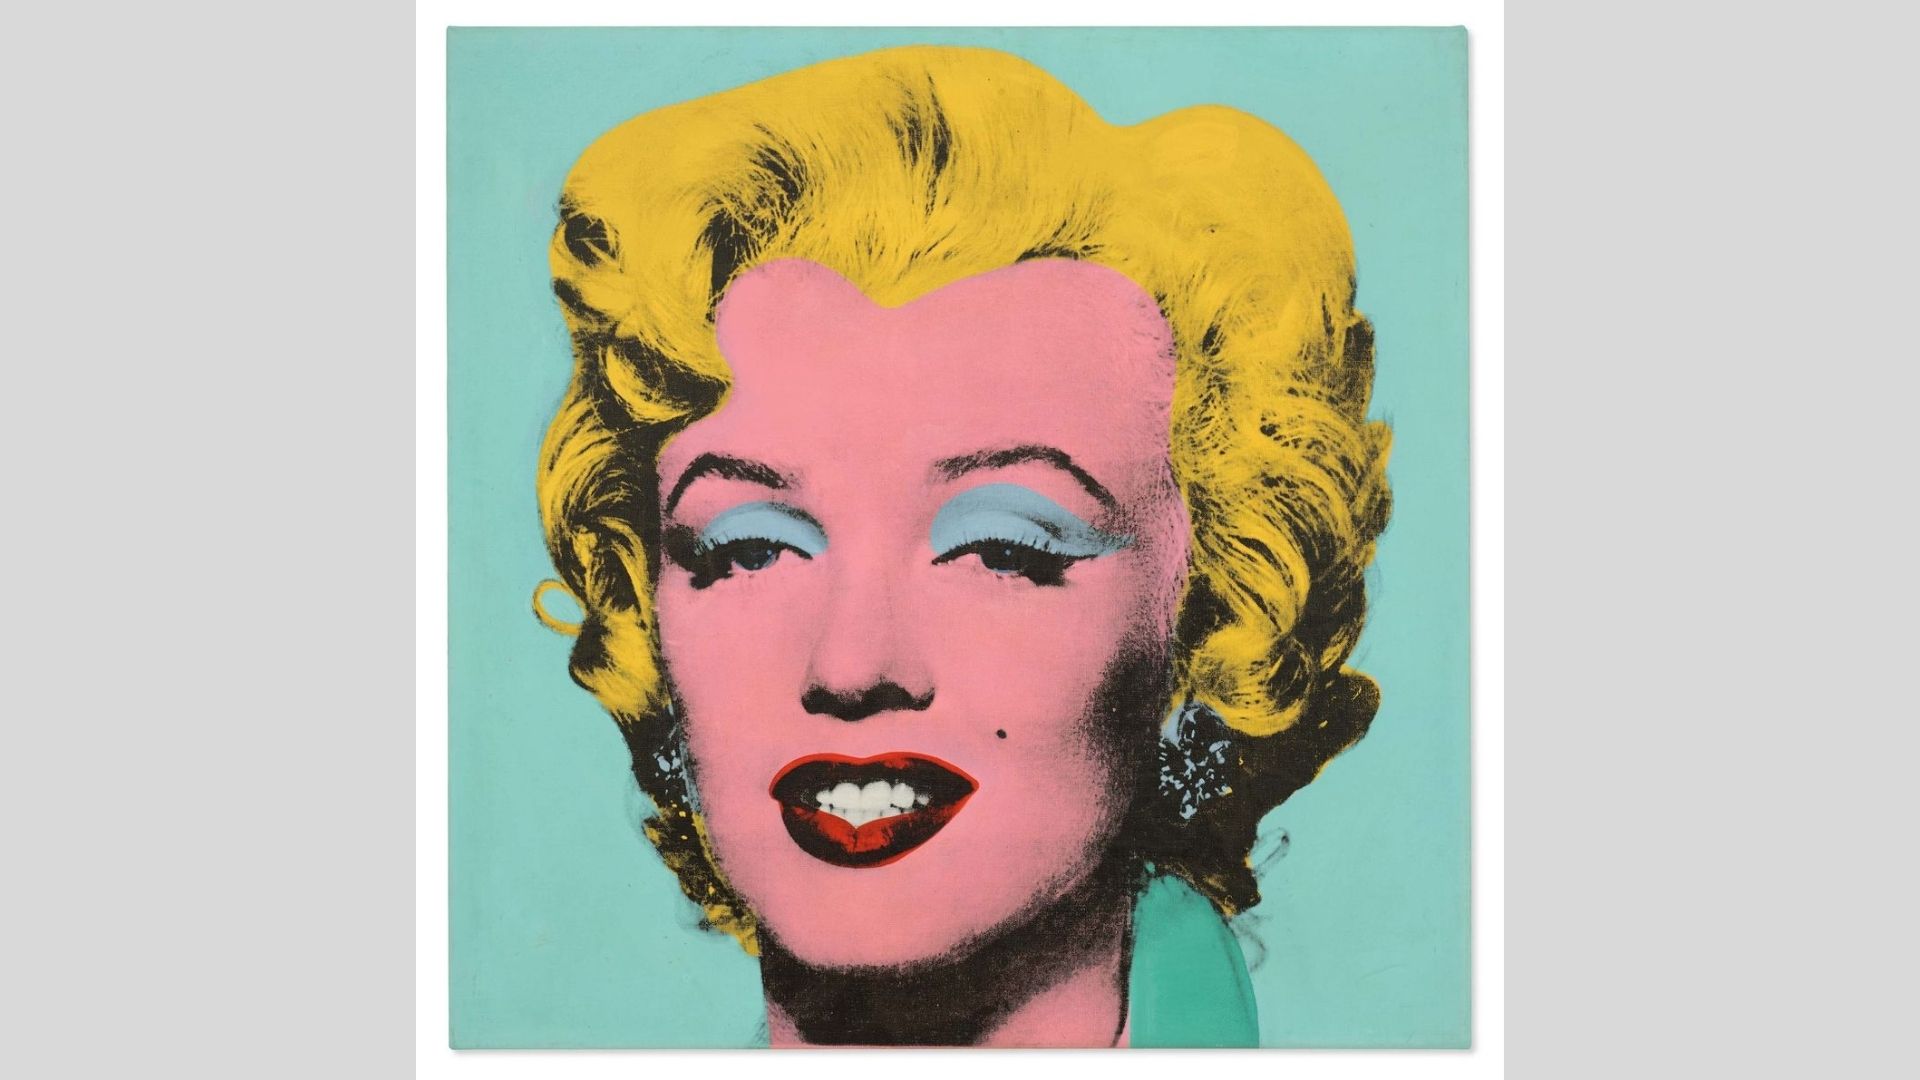 A Warhol Marilyn fetches $195 million at auction, setting a new record